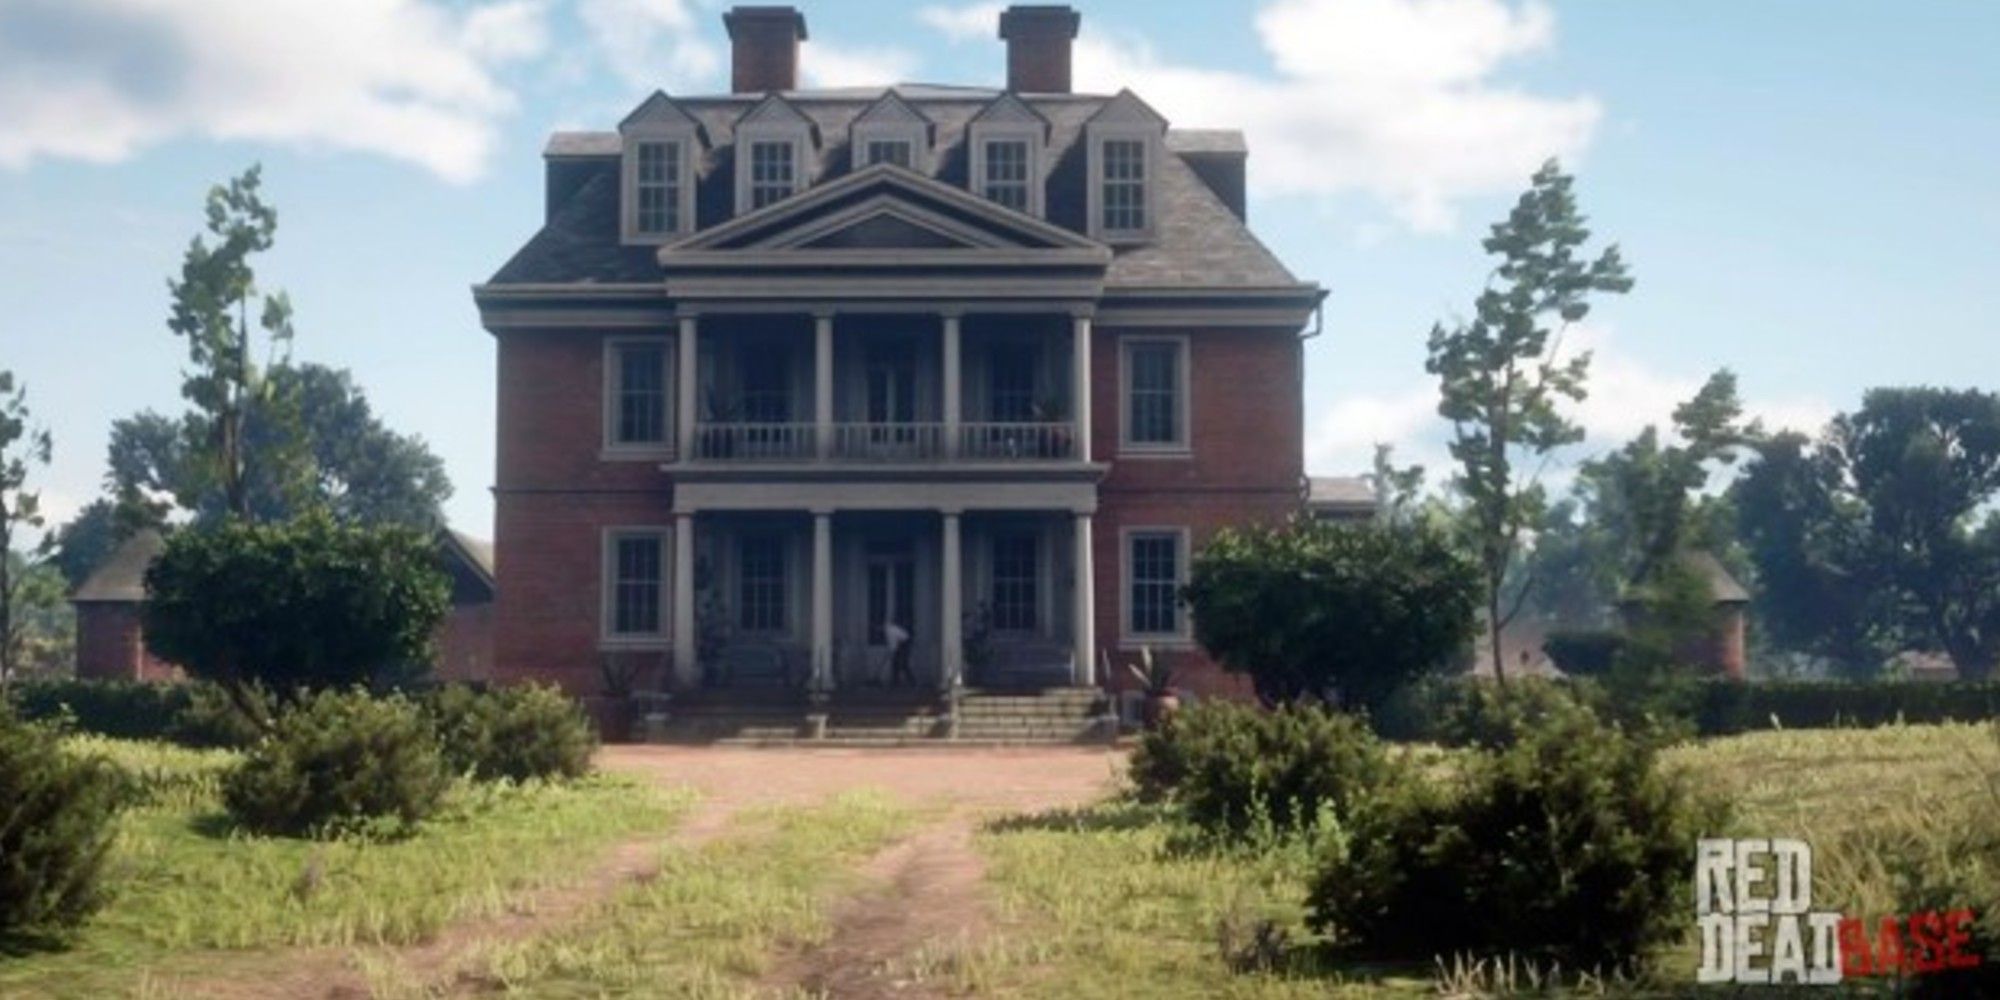 caliga hall in red dead redemption 2 